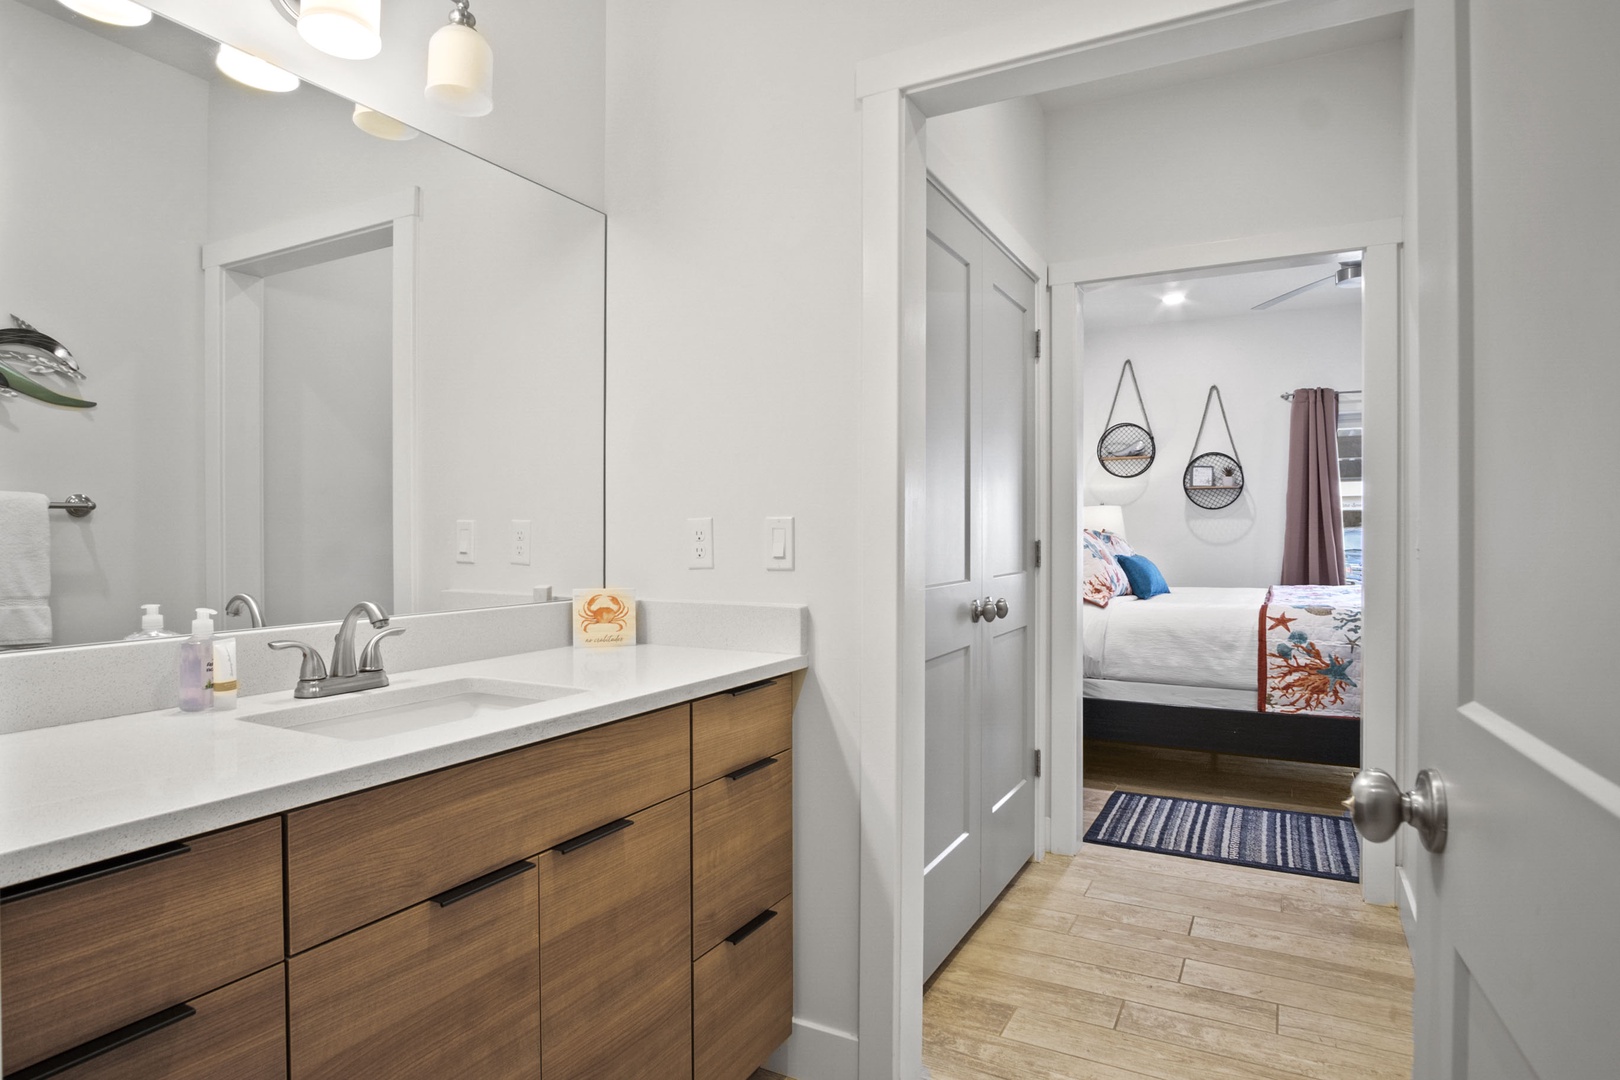 Enjoy the spa-like Master En Suite, with a spacious Single Vanity and Glass Shower